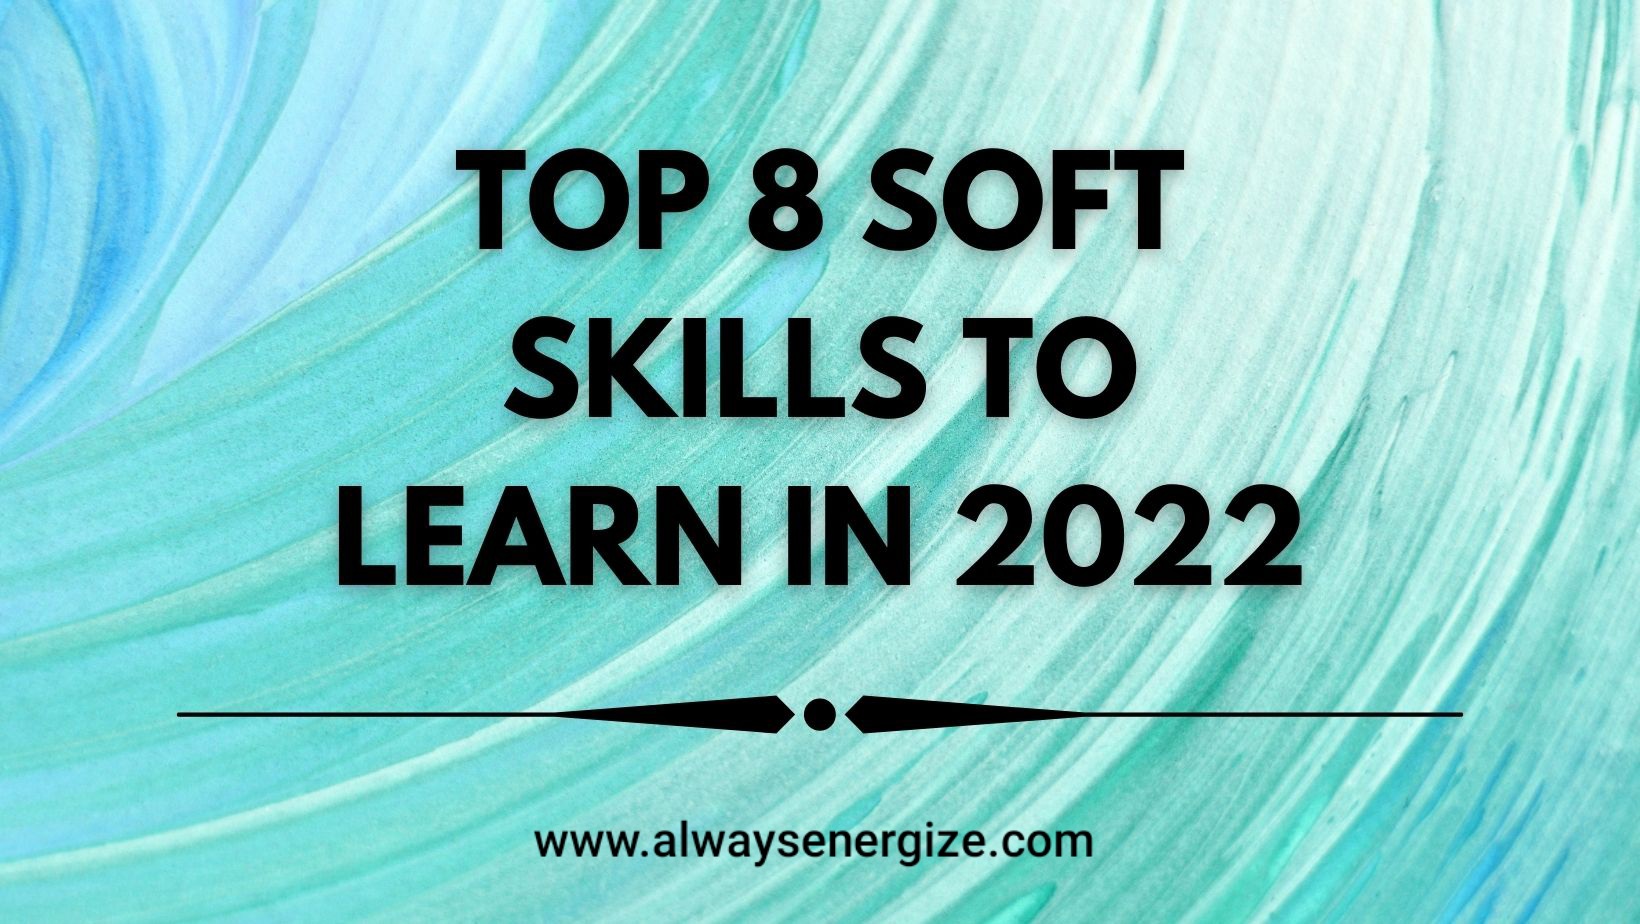 Top 8 Soft Skills To Learn In 2022